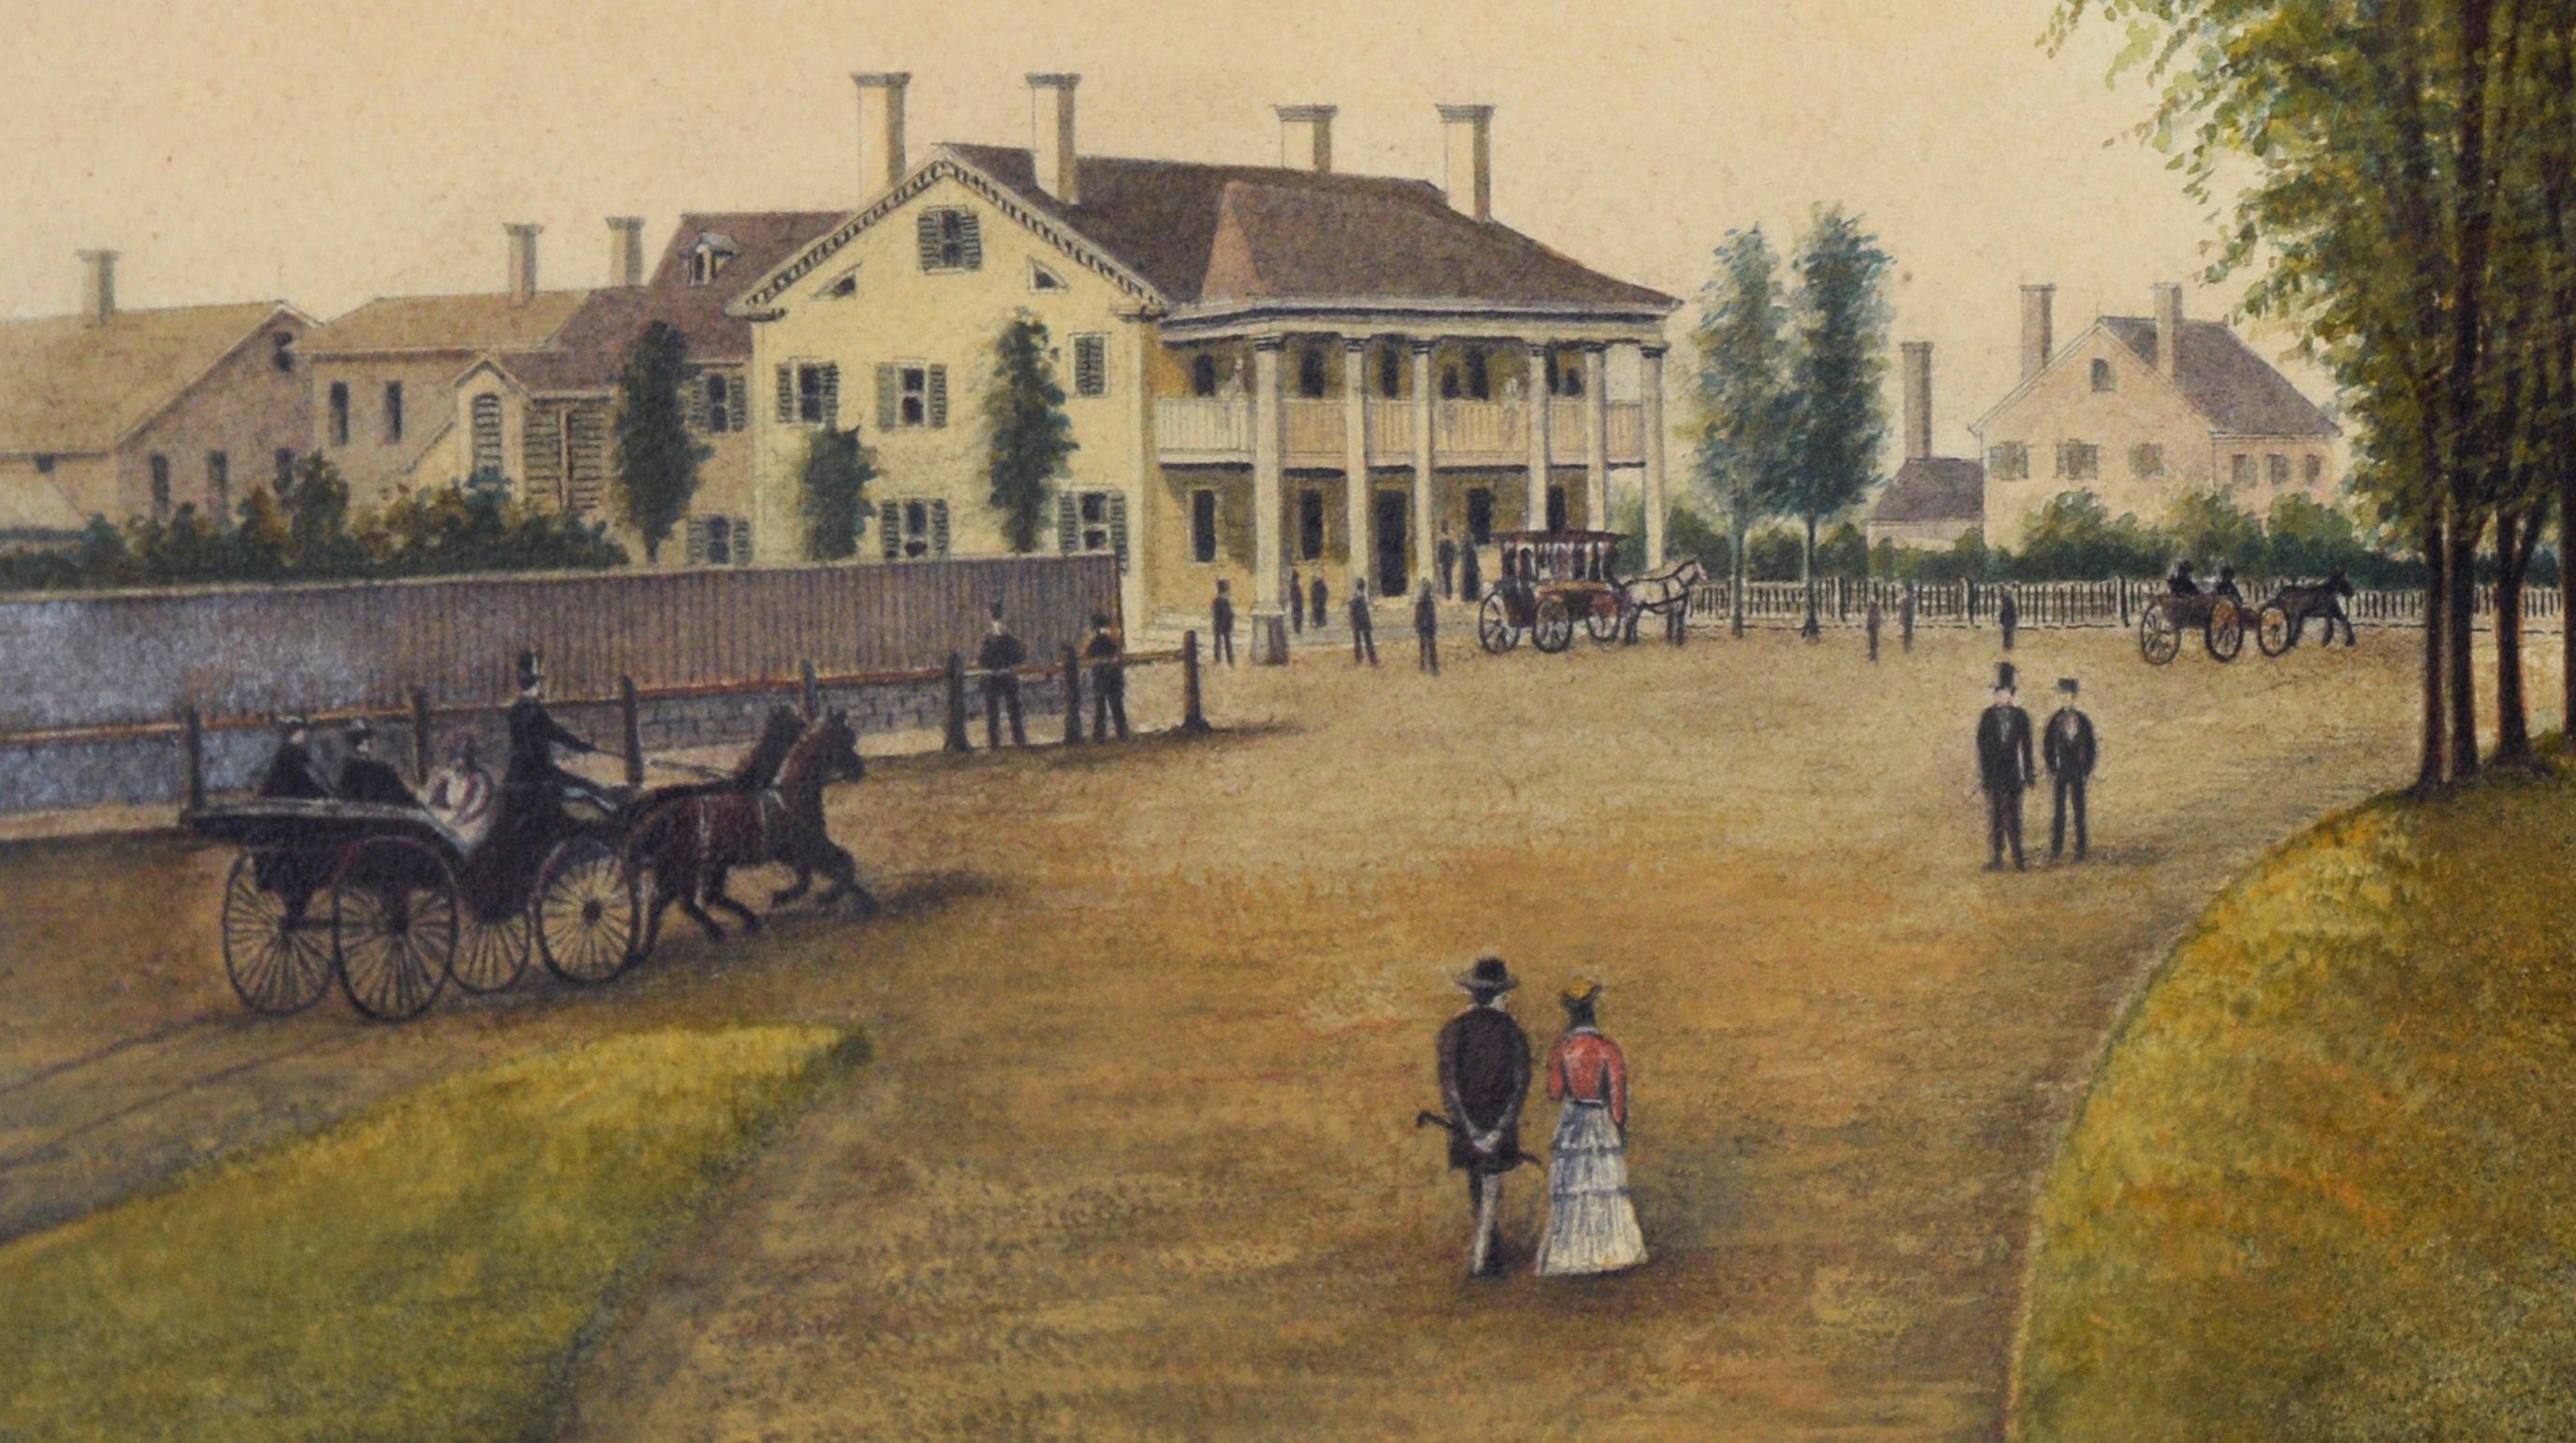 A Governor’s Mansion - Countryside Couple - Original Watercolor on Paper 1860s

Governor’s Mansion during the Civil Water. A watercolor painting depicting horse carriages and distinguished guests, a dressed up man and woman walking along a